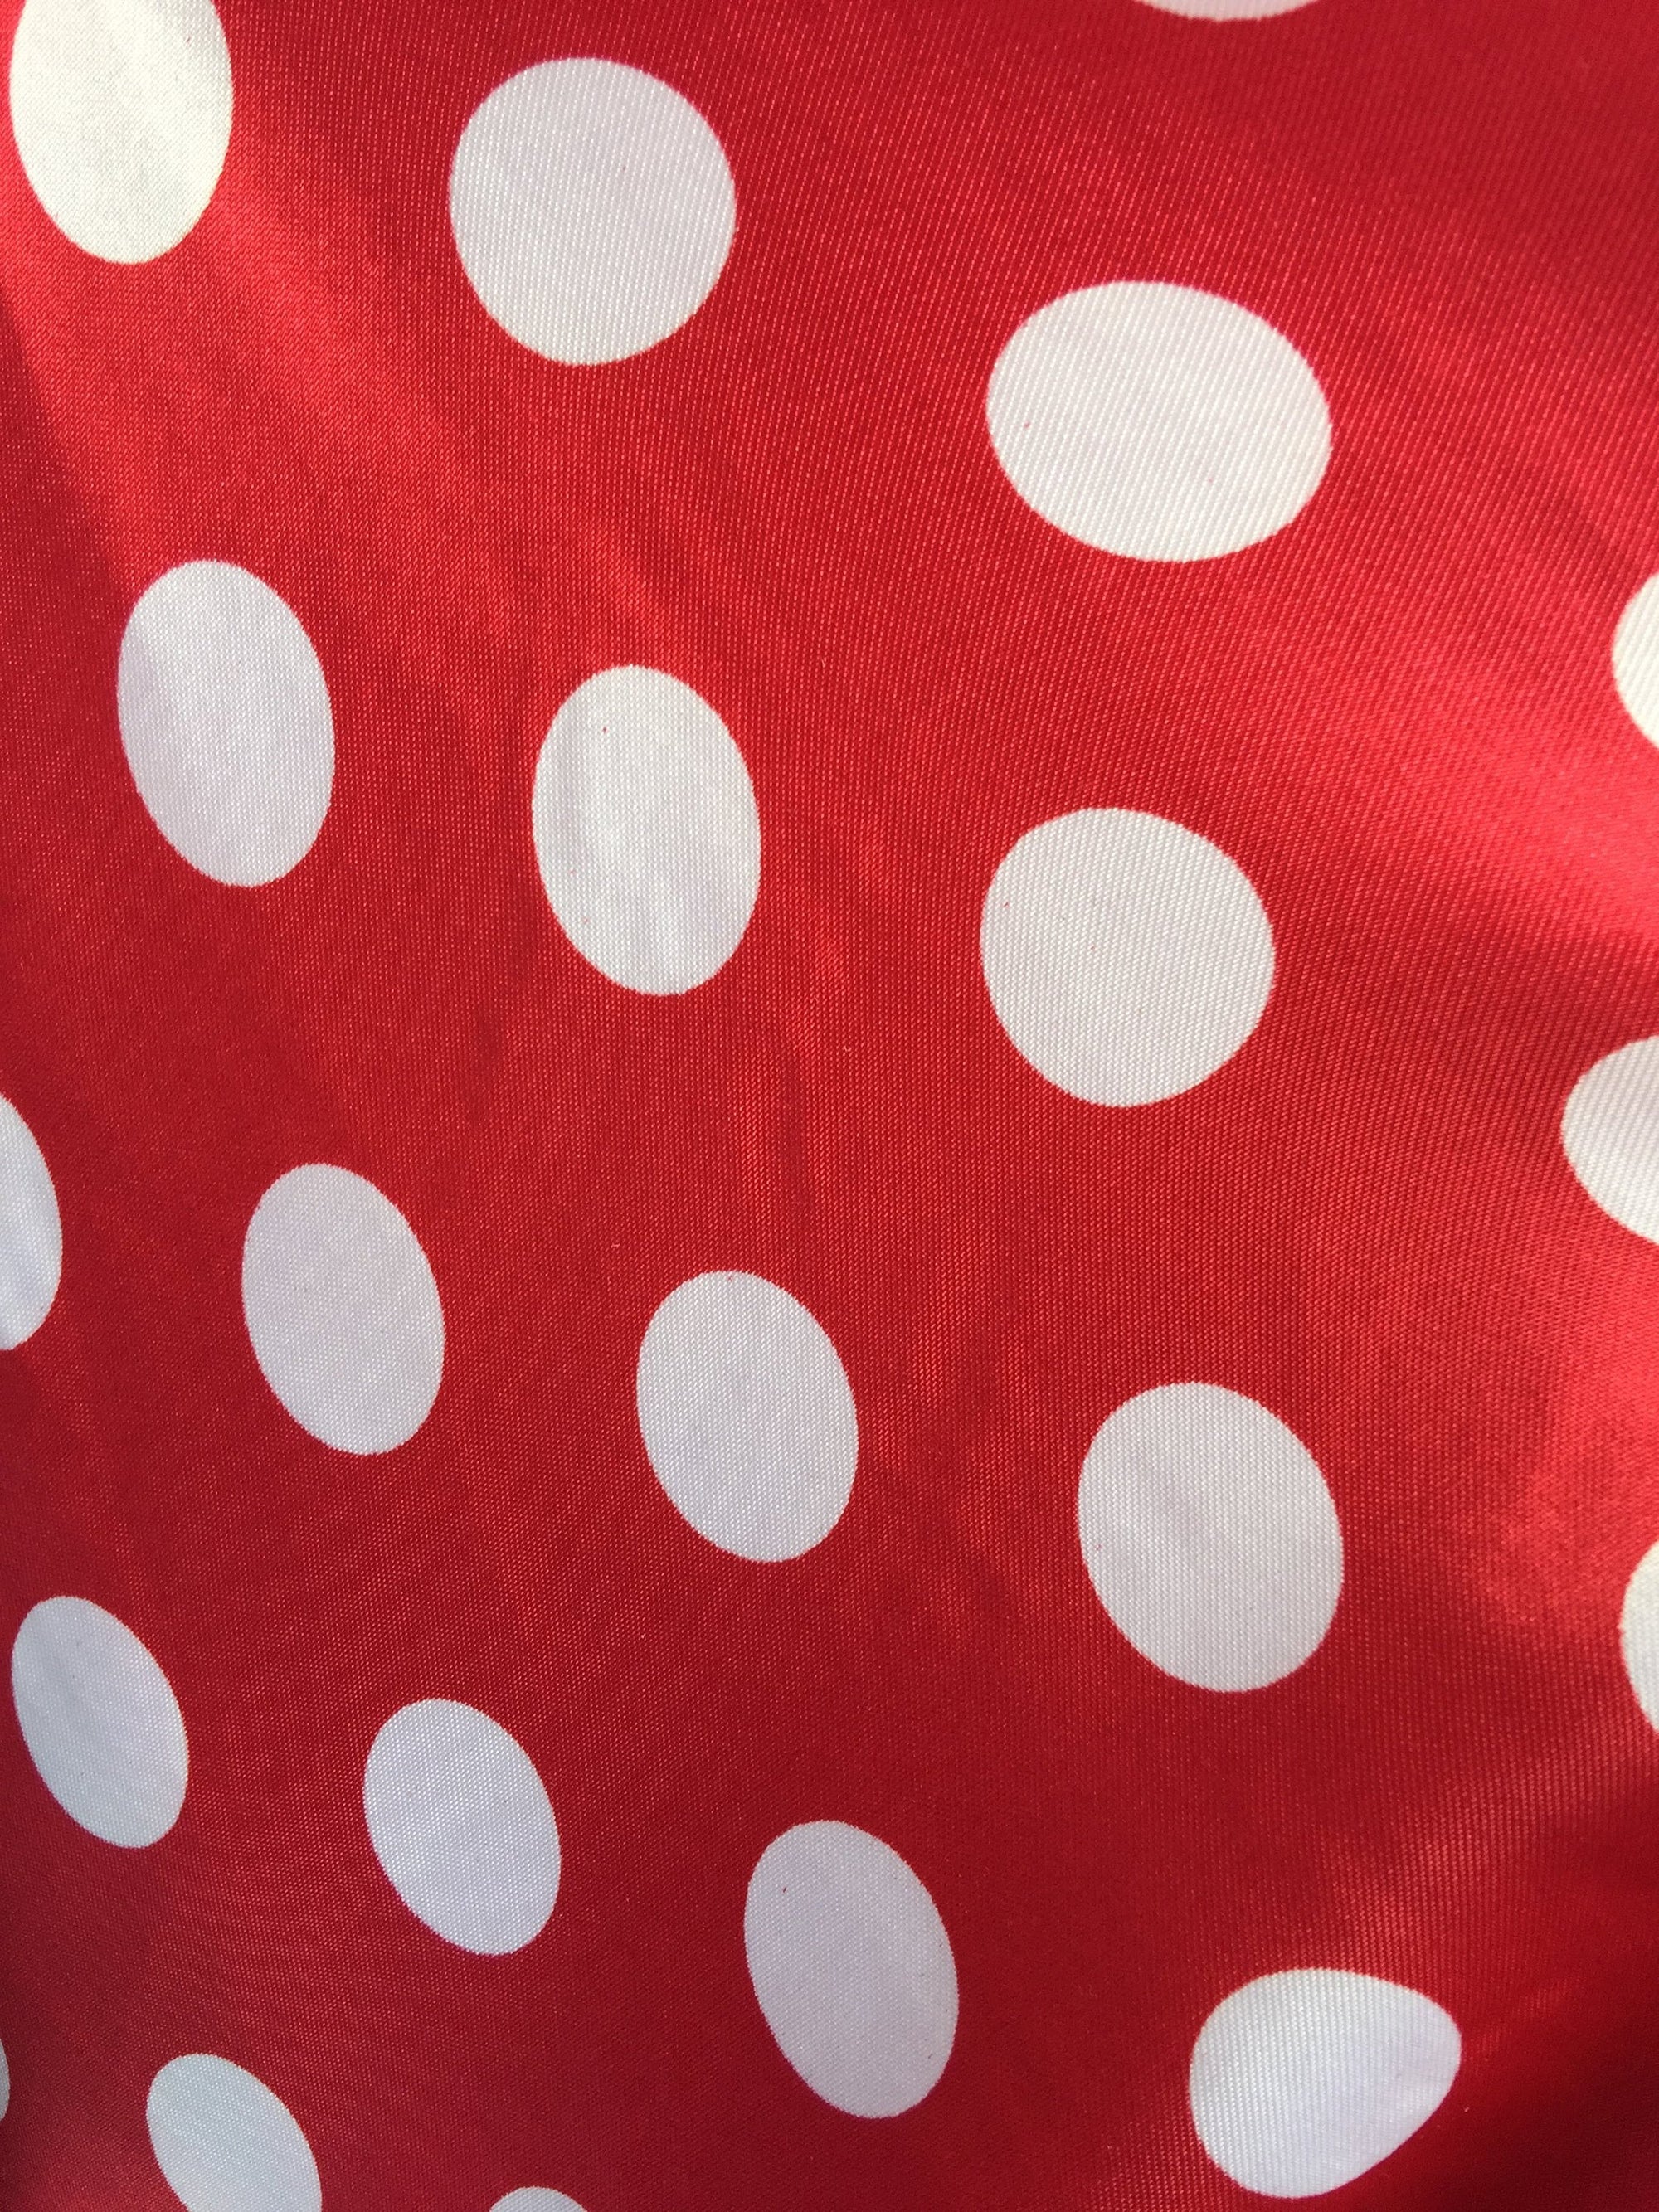 Shelby 0.75" WHITE Polka Dots on RED Polyester Light Weight Satin Fabric by the Yard - 10070